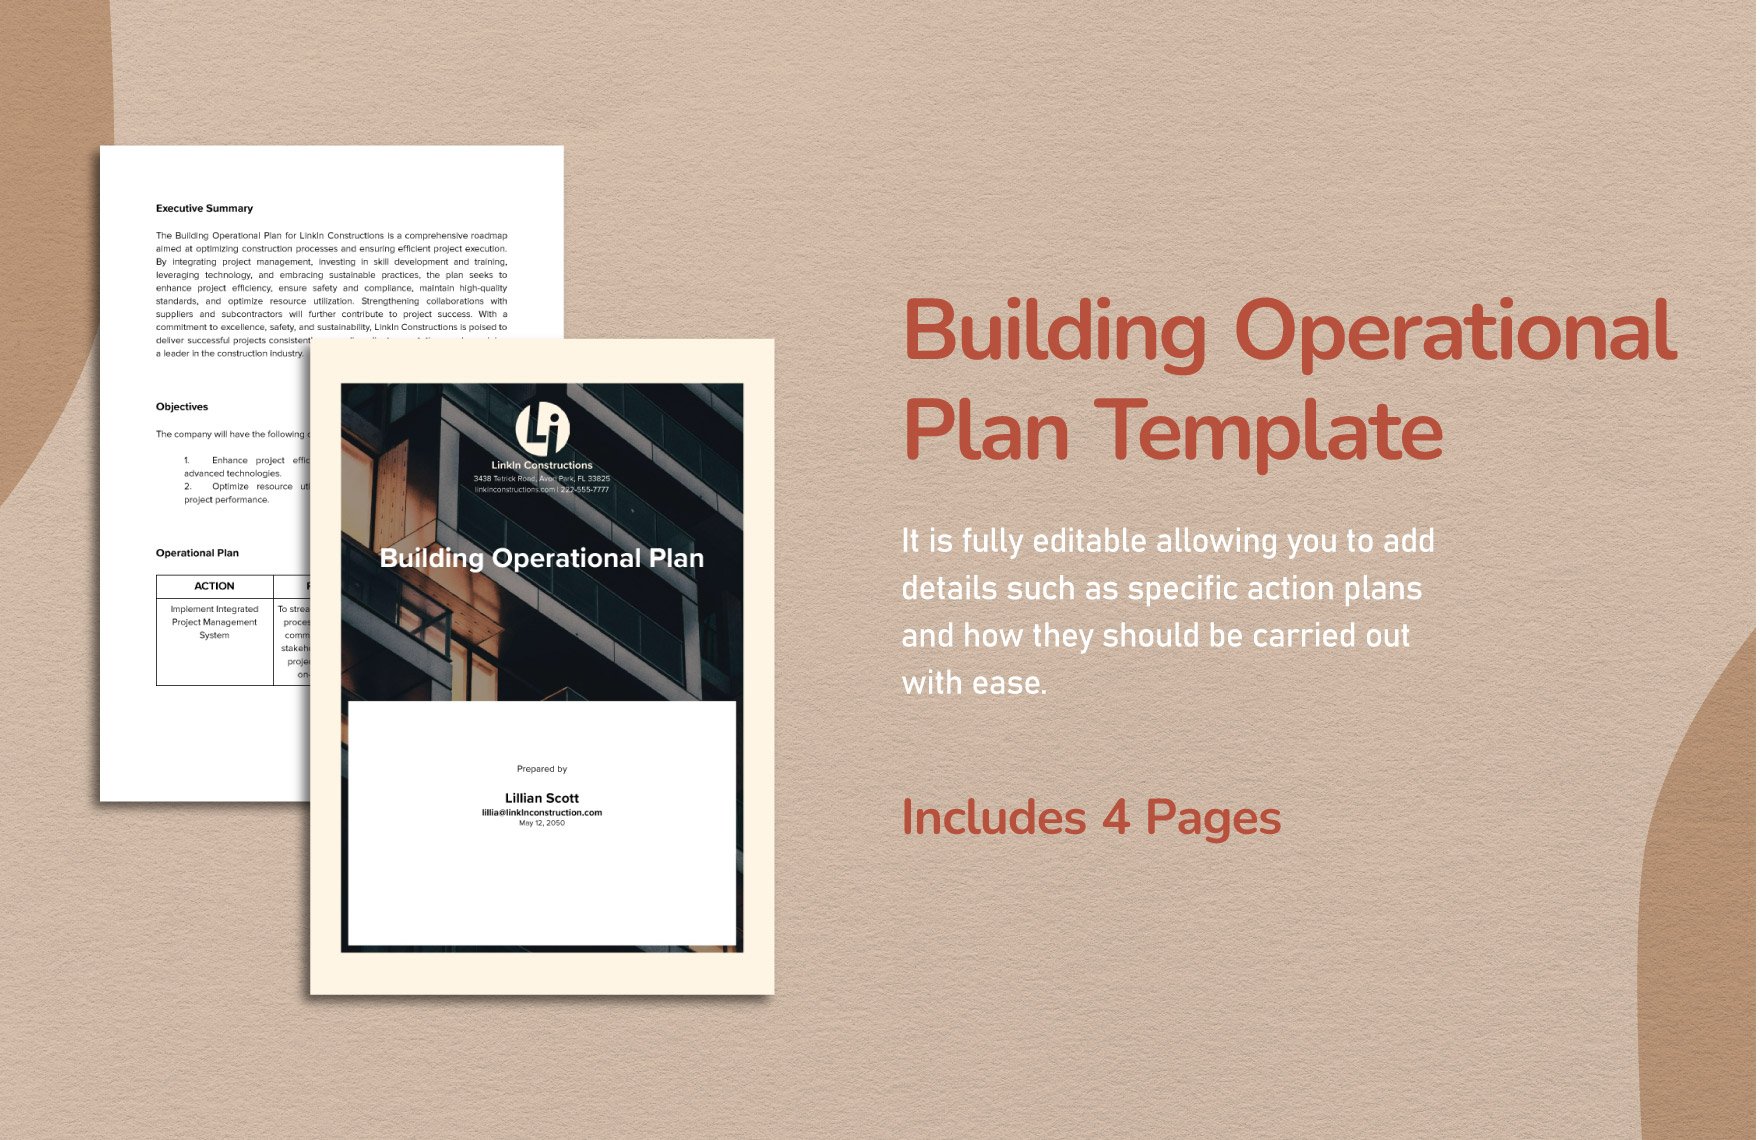 Building Operational Plan Template